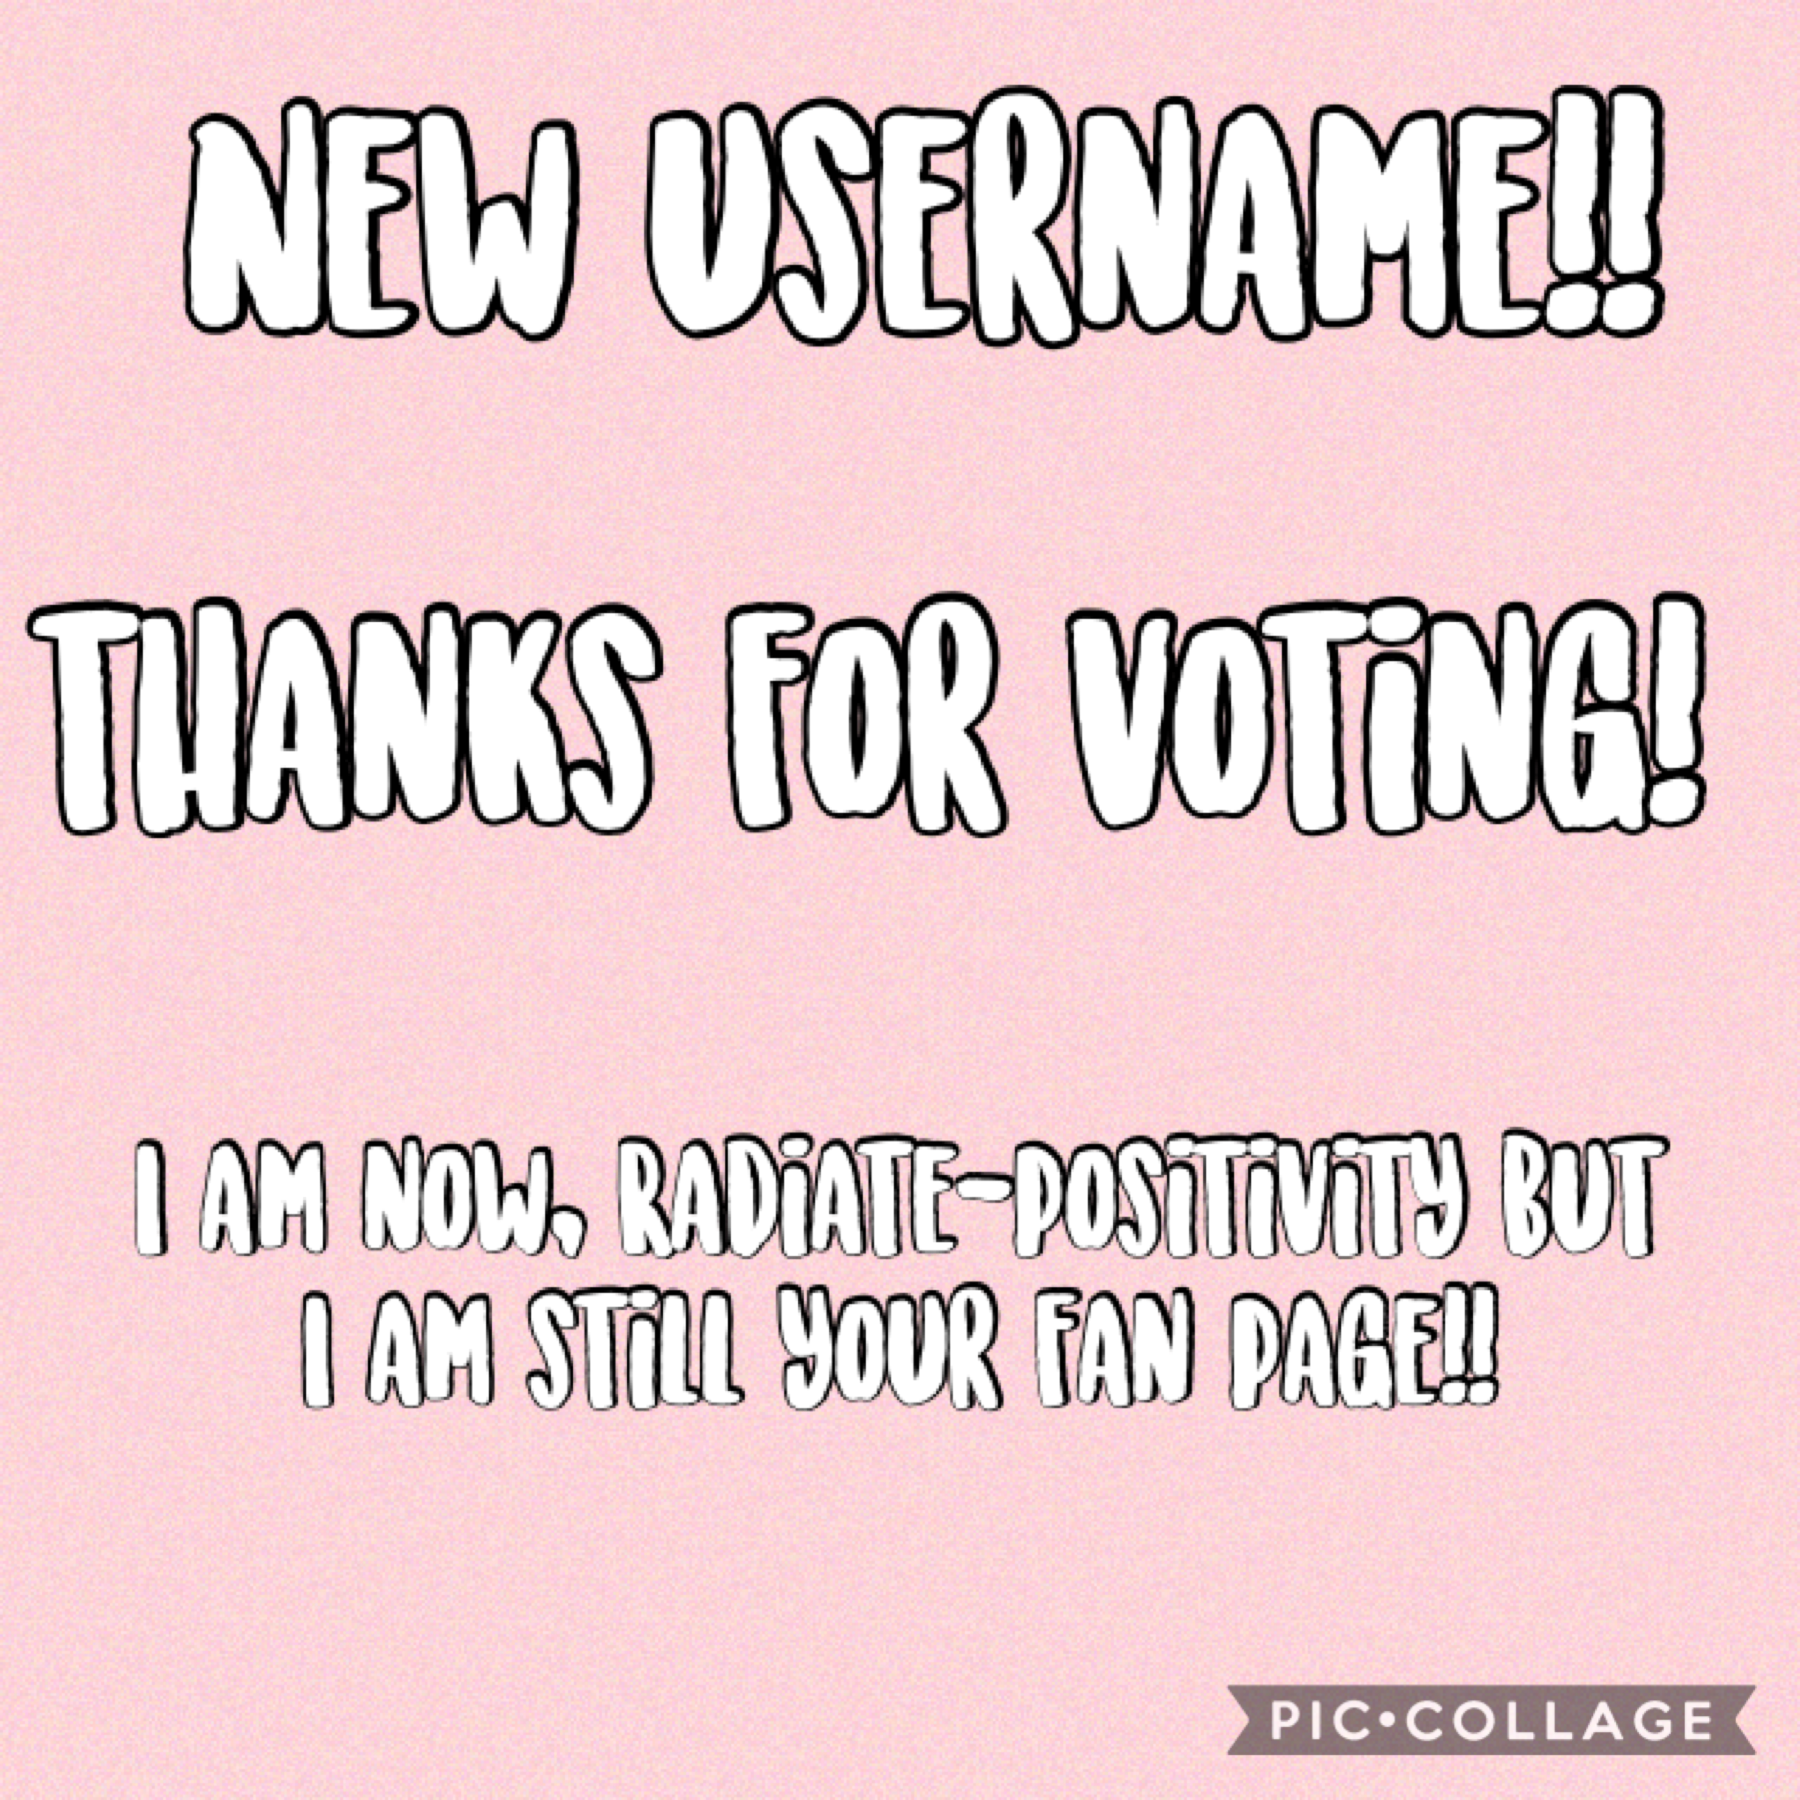 Please let me know in comments if you’d like to make me a profile picture💕